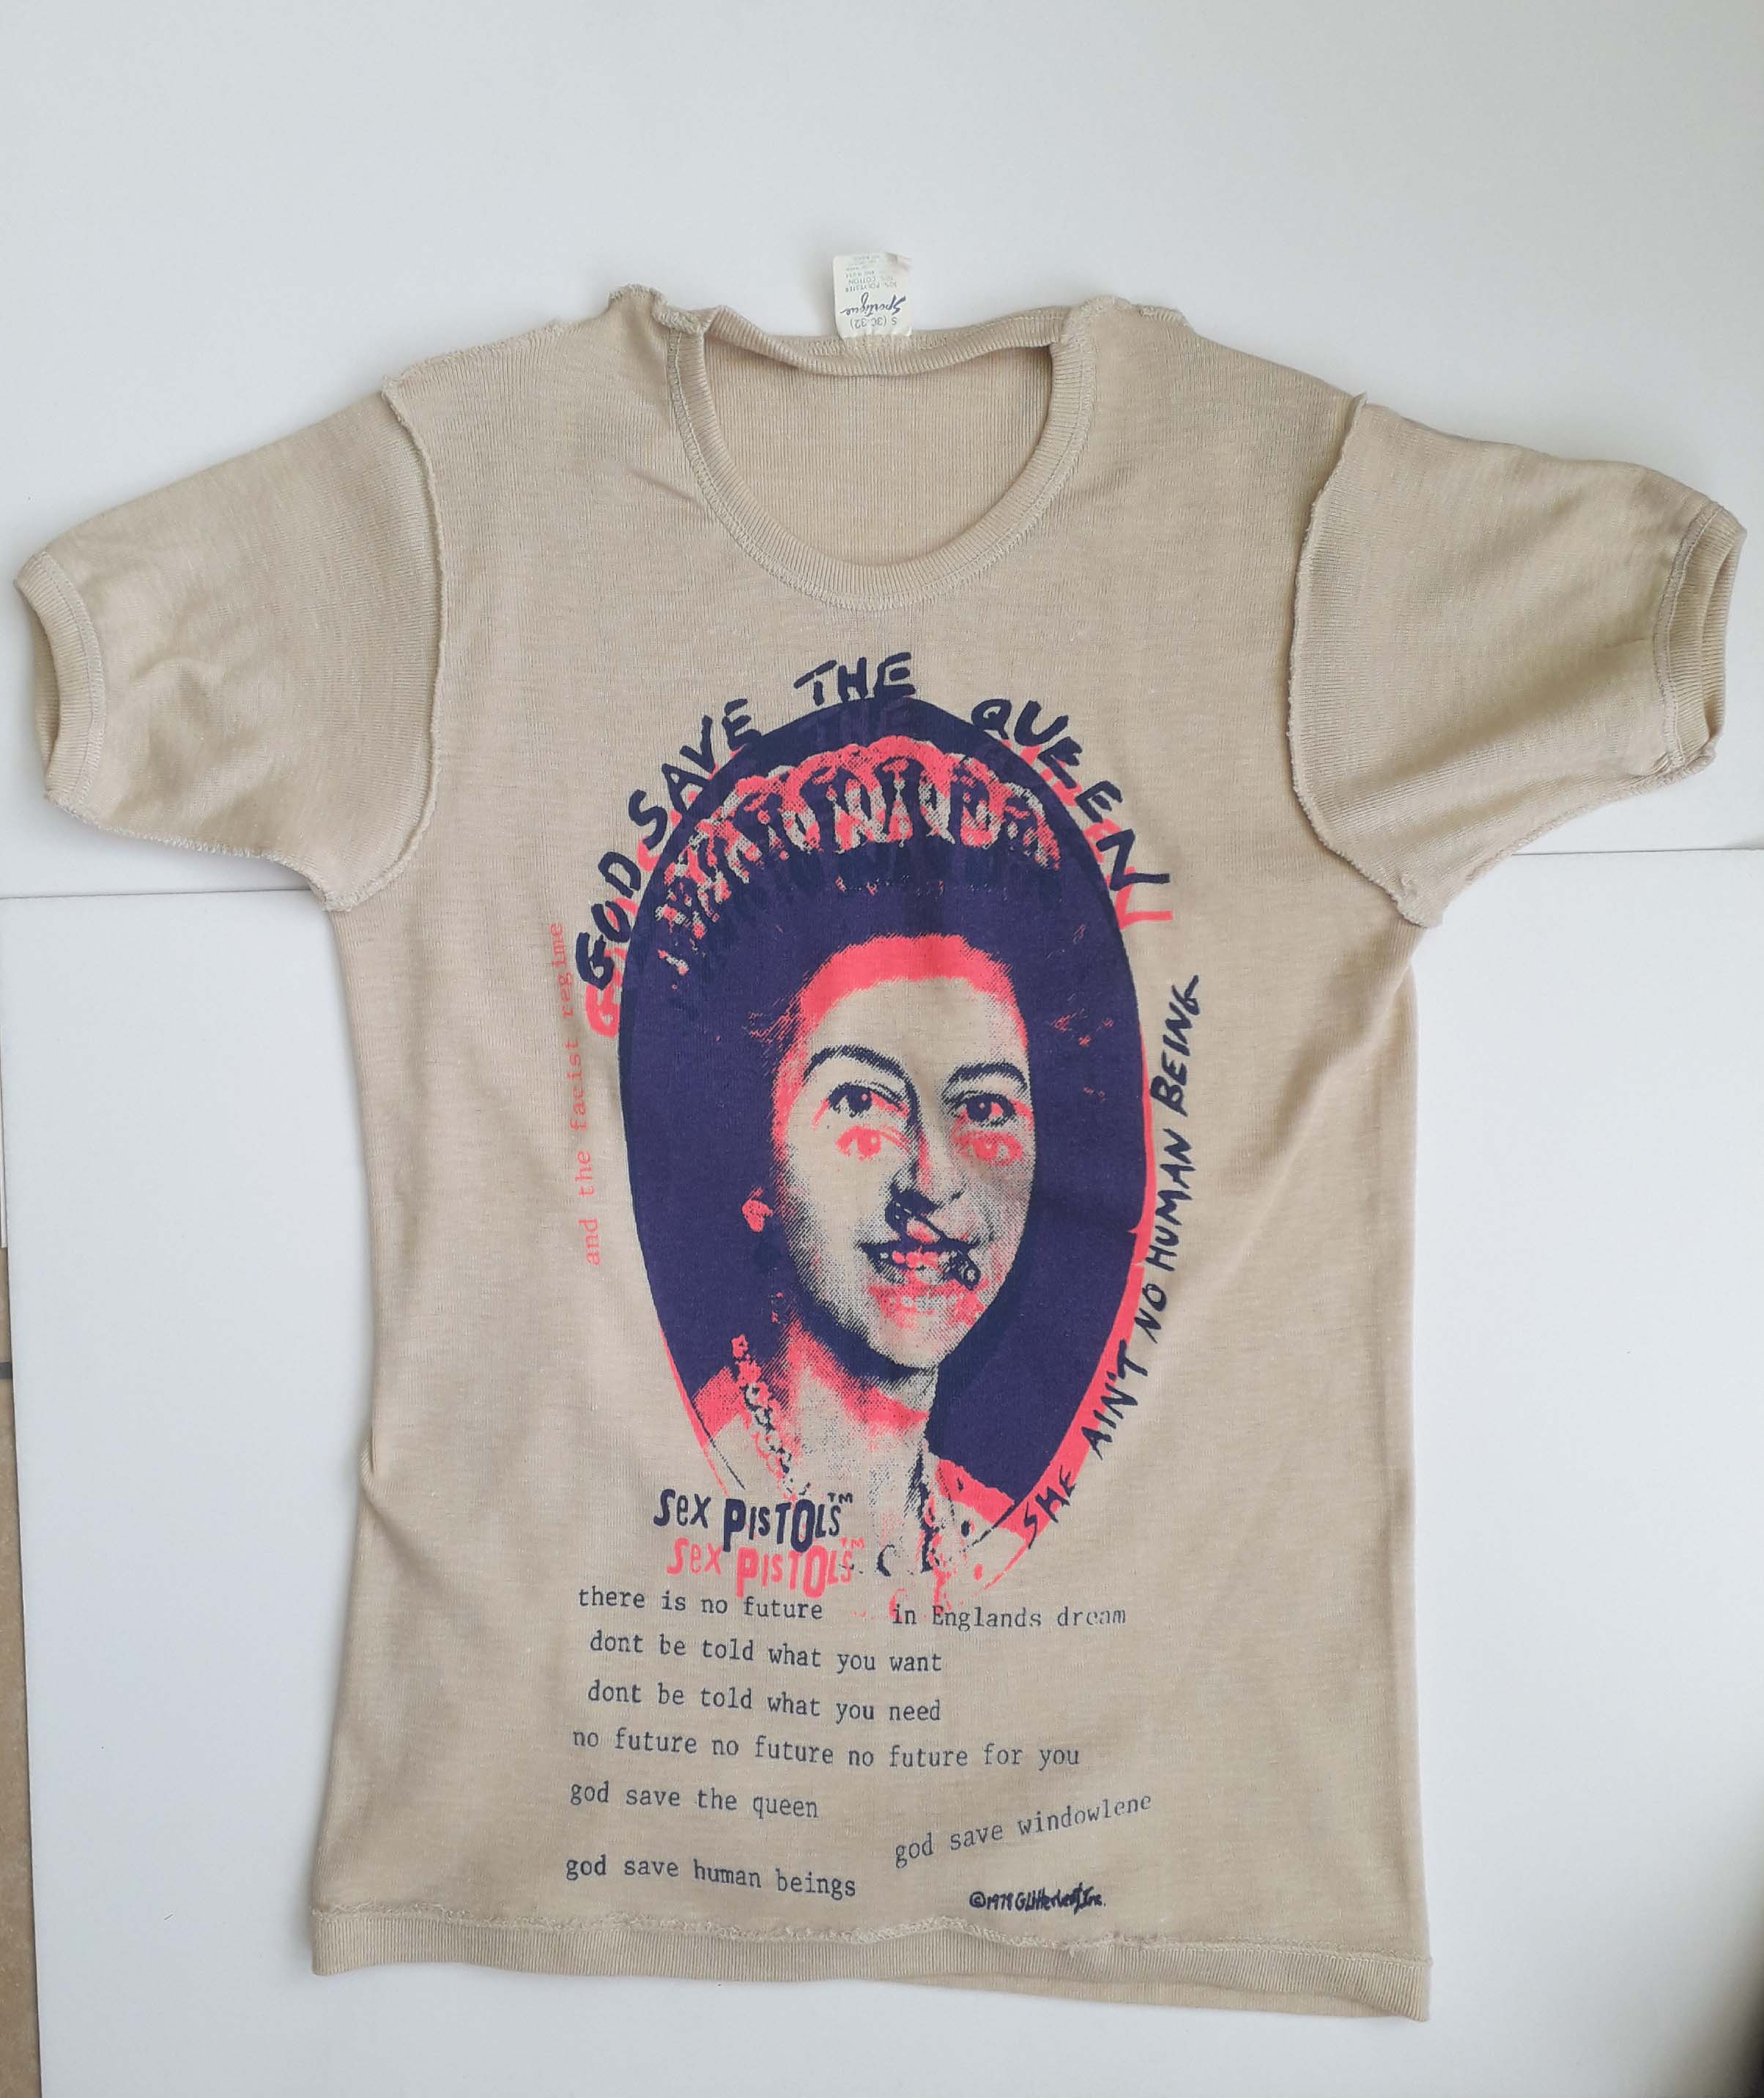 God save The Queen T-shirt 1977